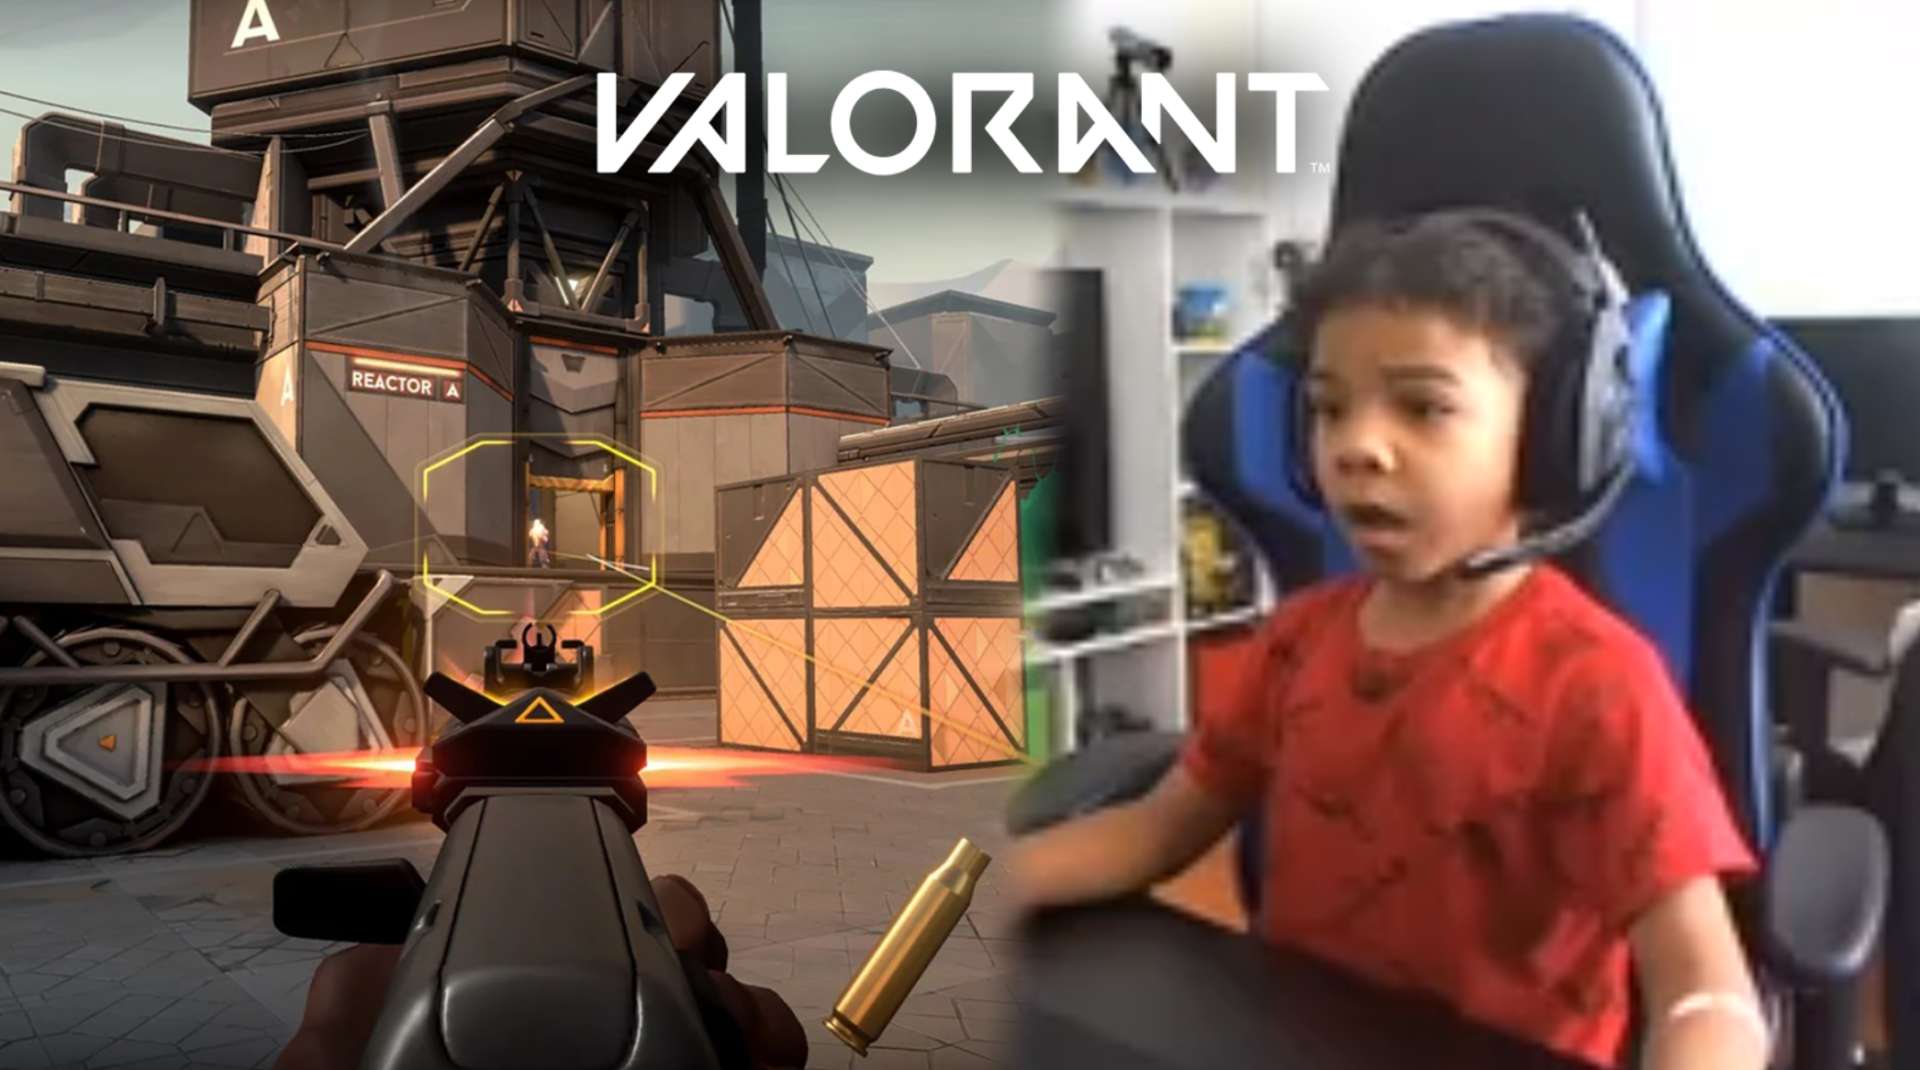 Five year old Valorant player